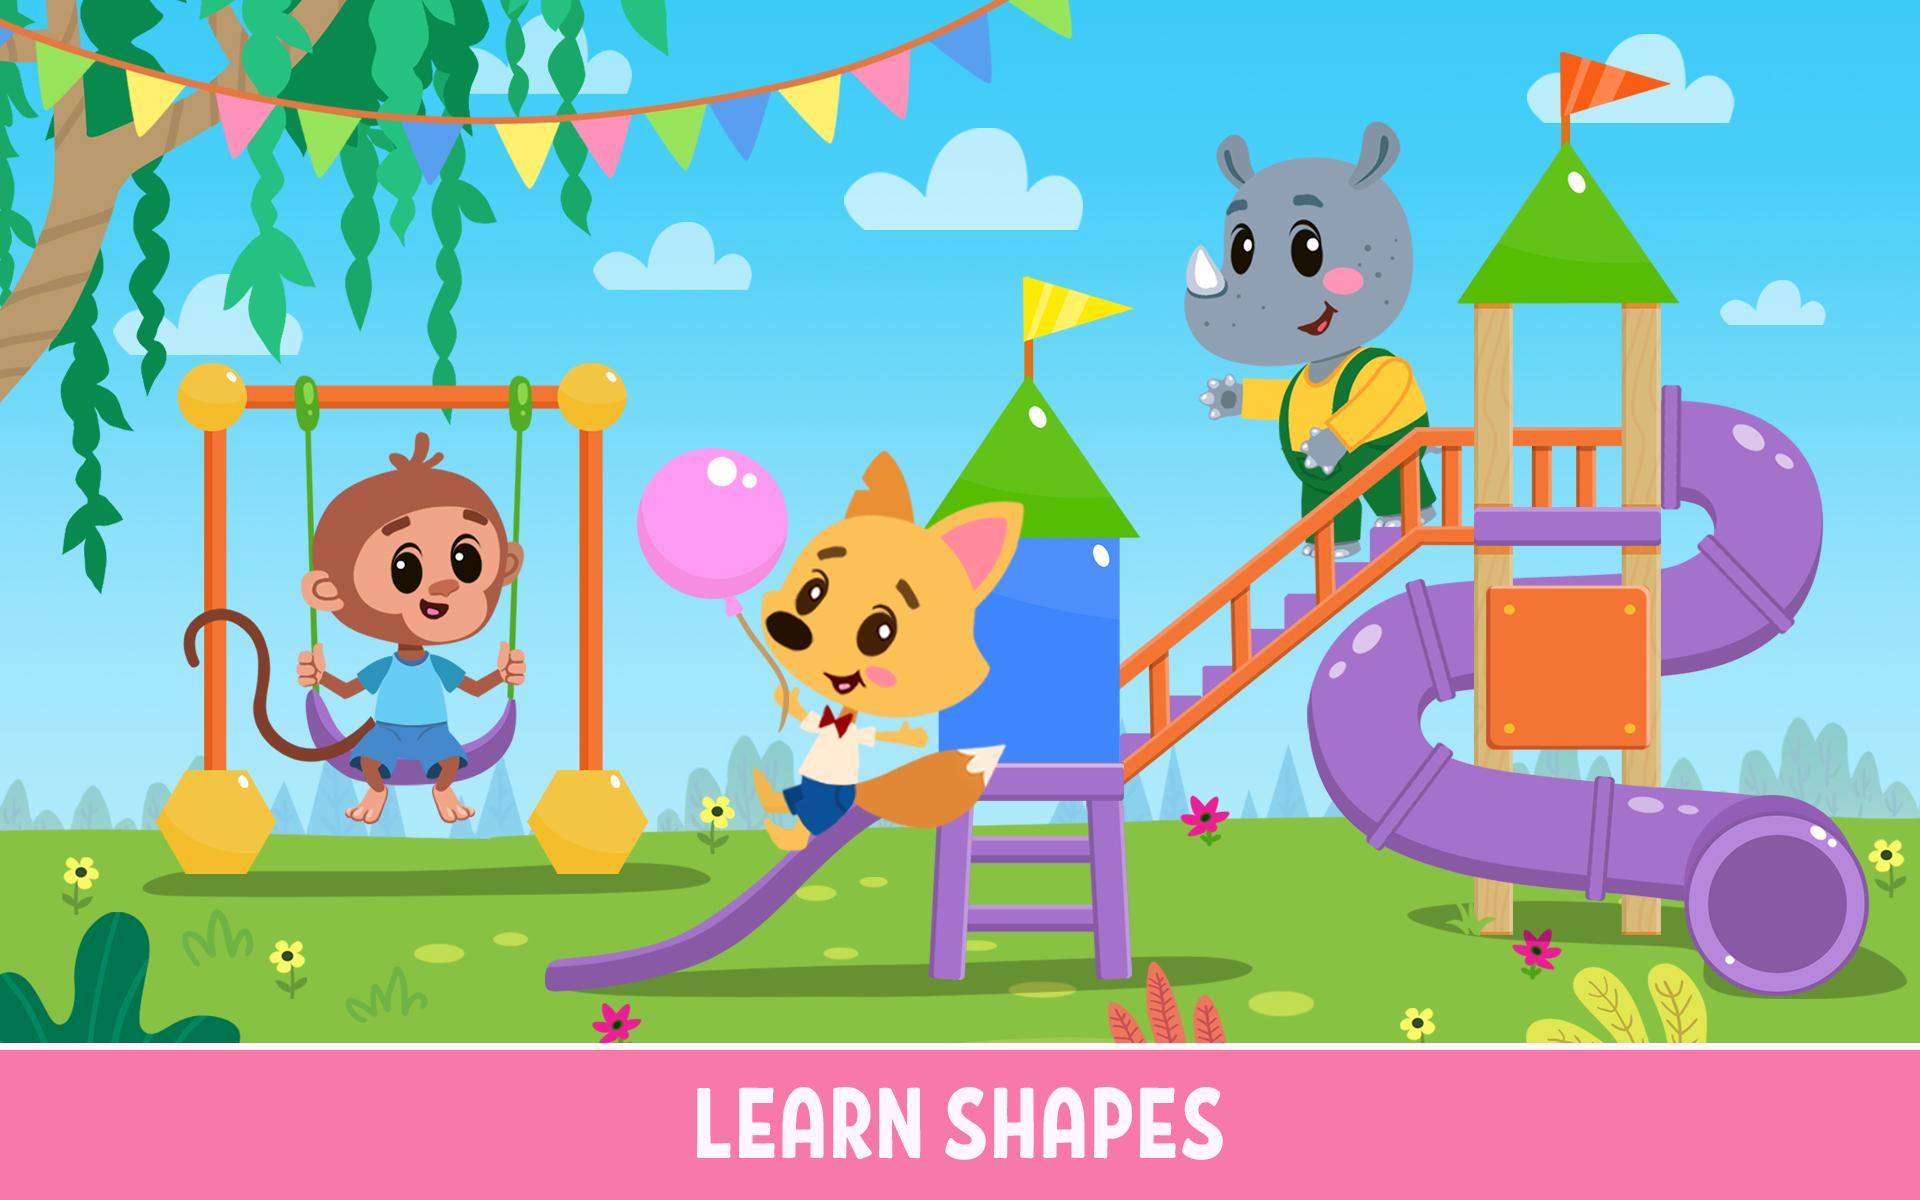 Kids Academy - learning games for toddlers 3.1.3 Screenshot 14